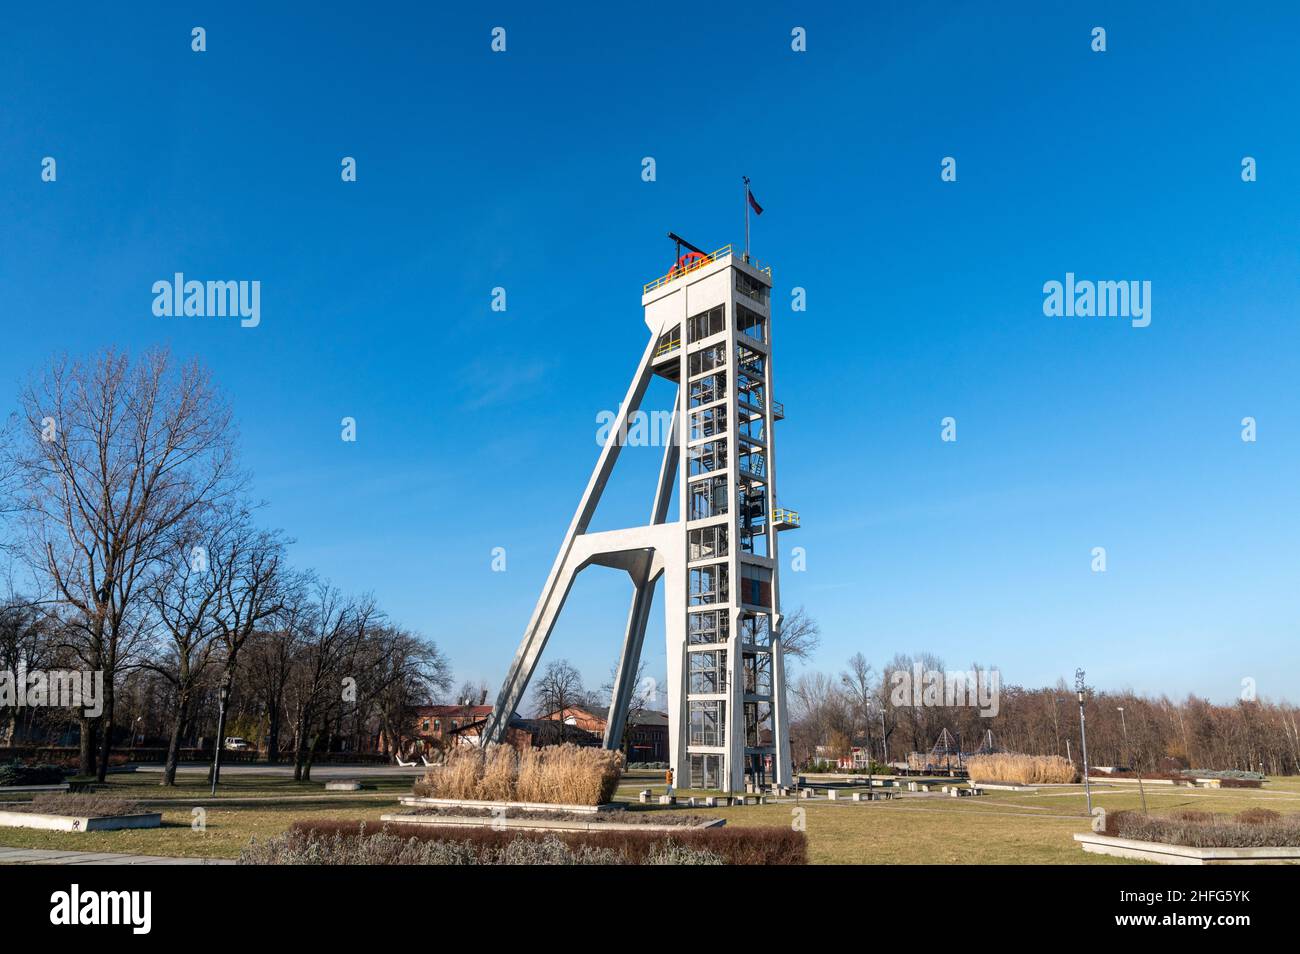 Chorzow, Silesia, Poland; January 9th, 2022: Mineshaft of a former Prezydent coal mine renovated and changed into a viewing platform in the local park Stock Photo